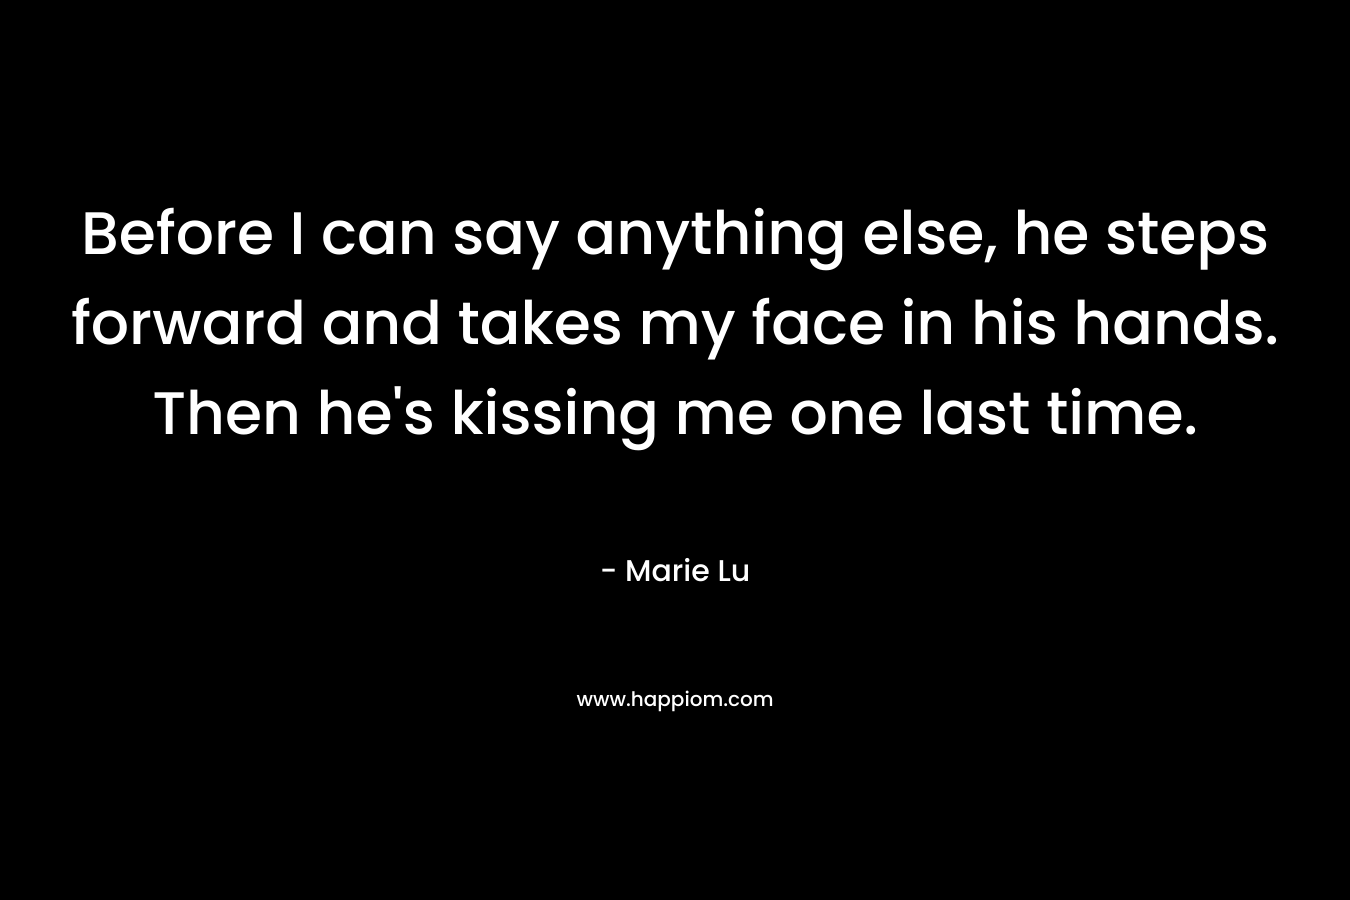 Before I can say anything else, he steps forward and takes my face in his hands. Then he’s kissing me one last time. – Marie Lu